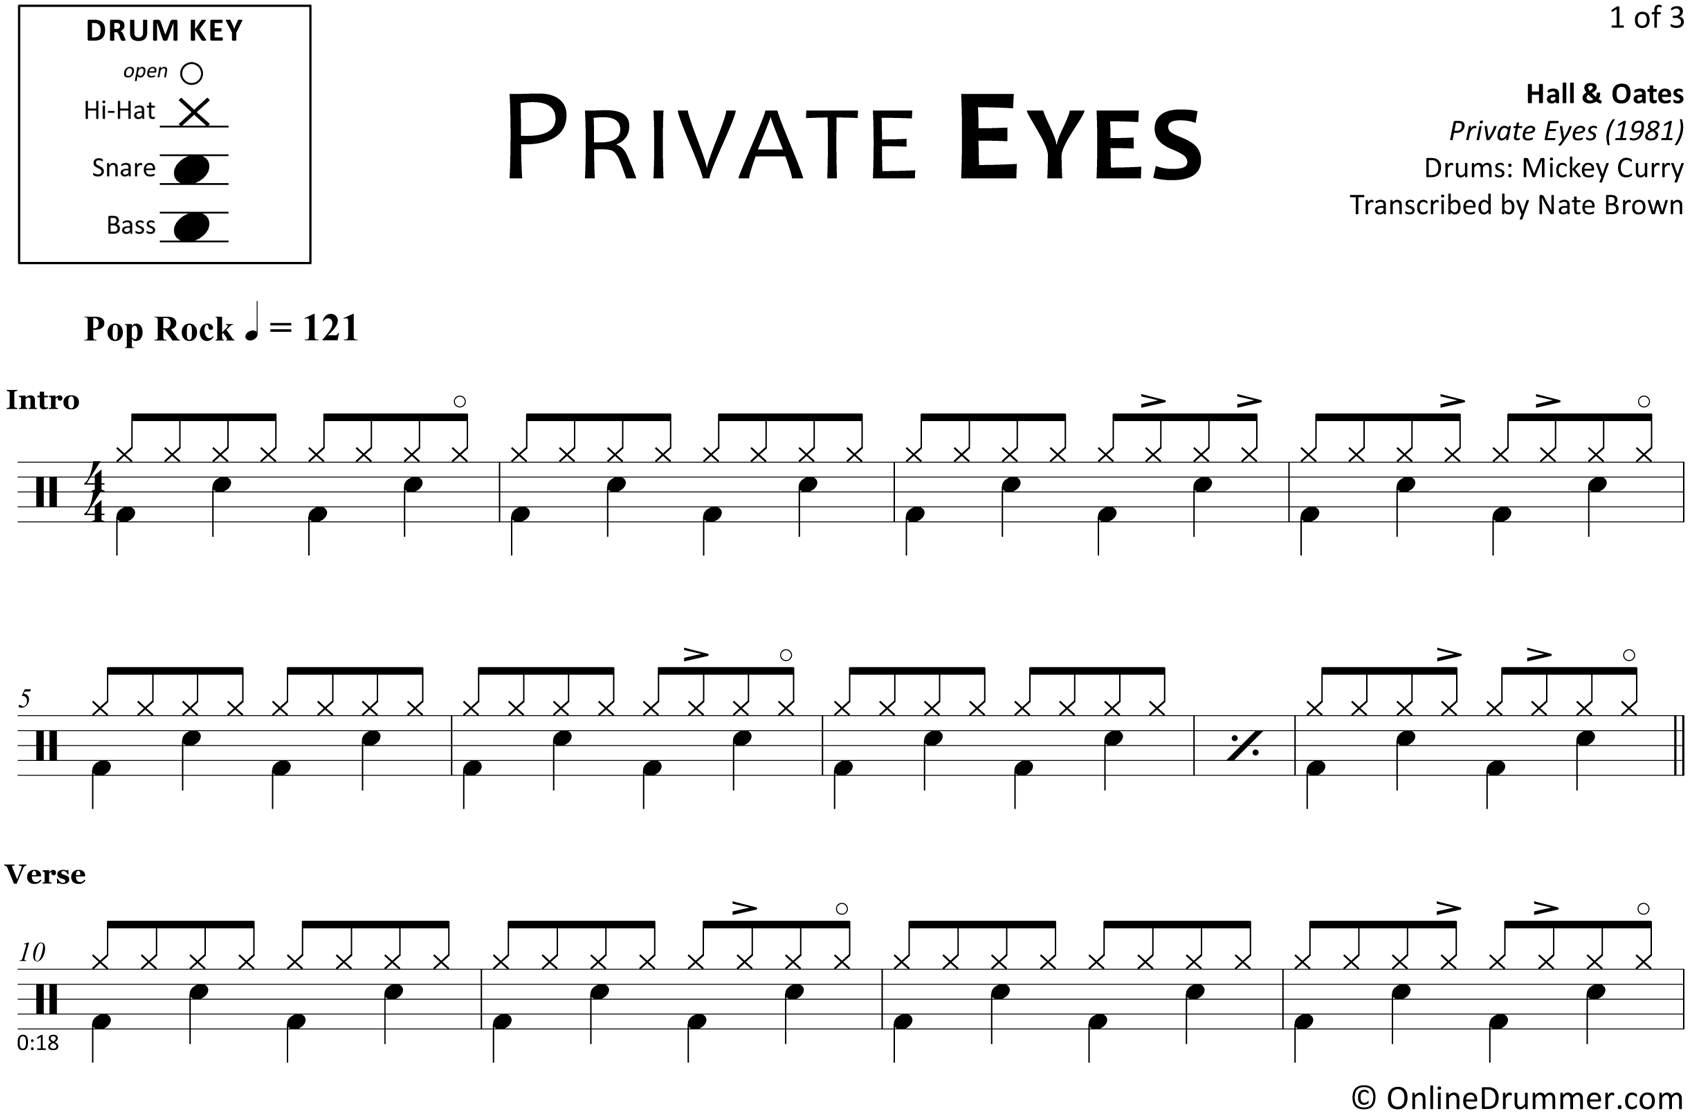 Private Eyes - Hall and Oates - Drum Sheet Music